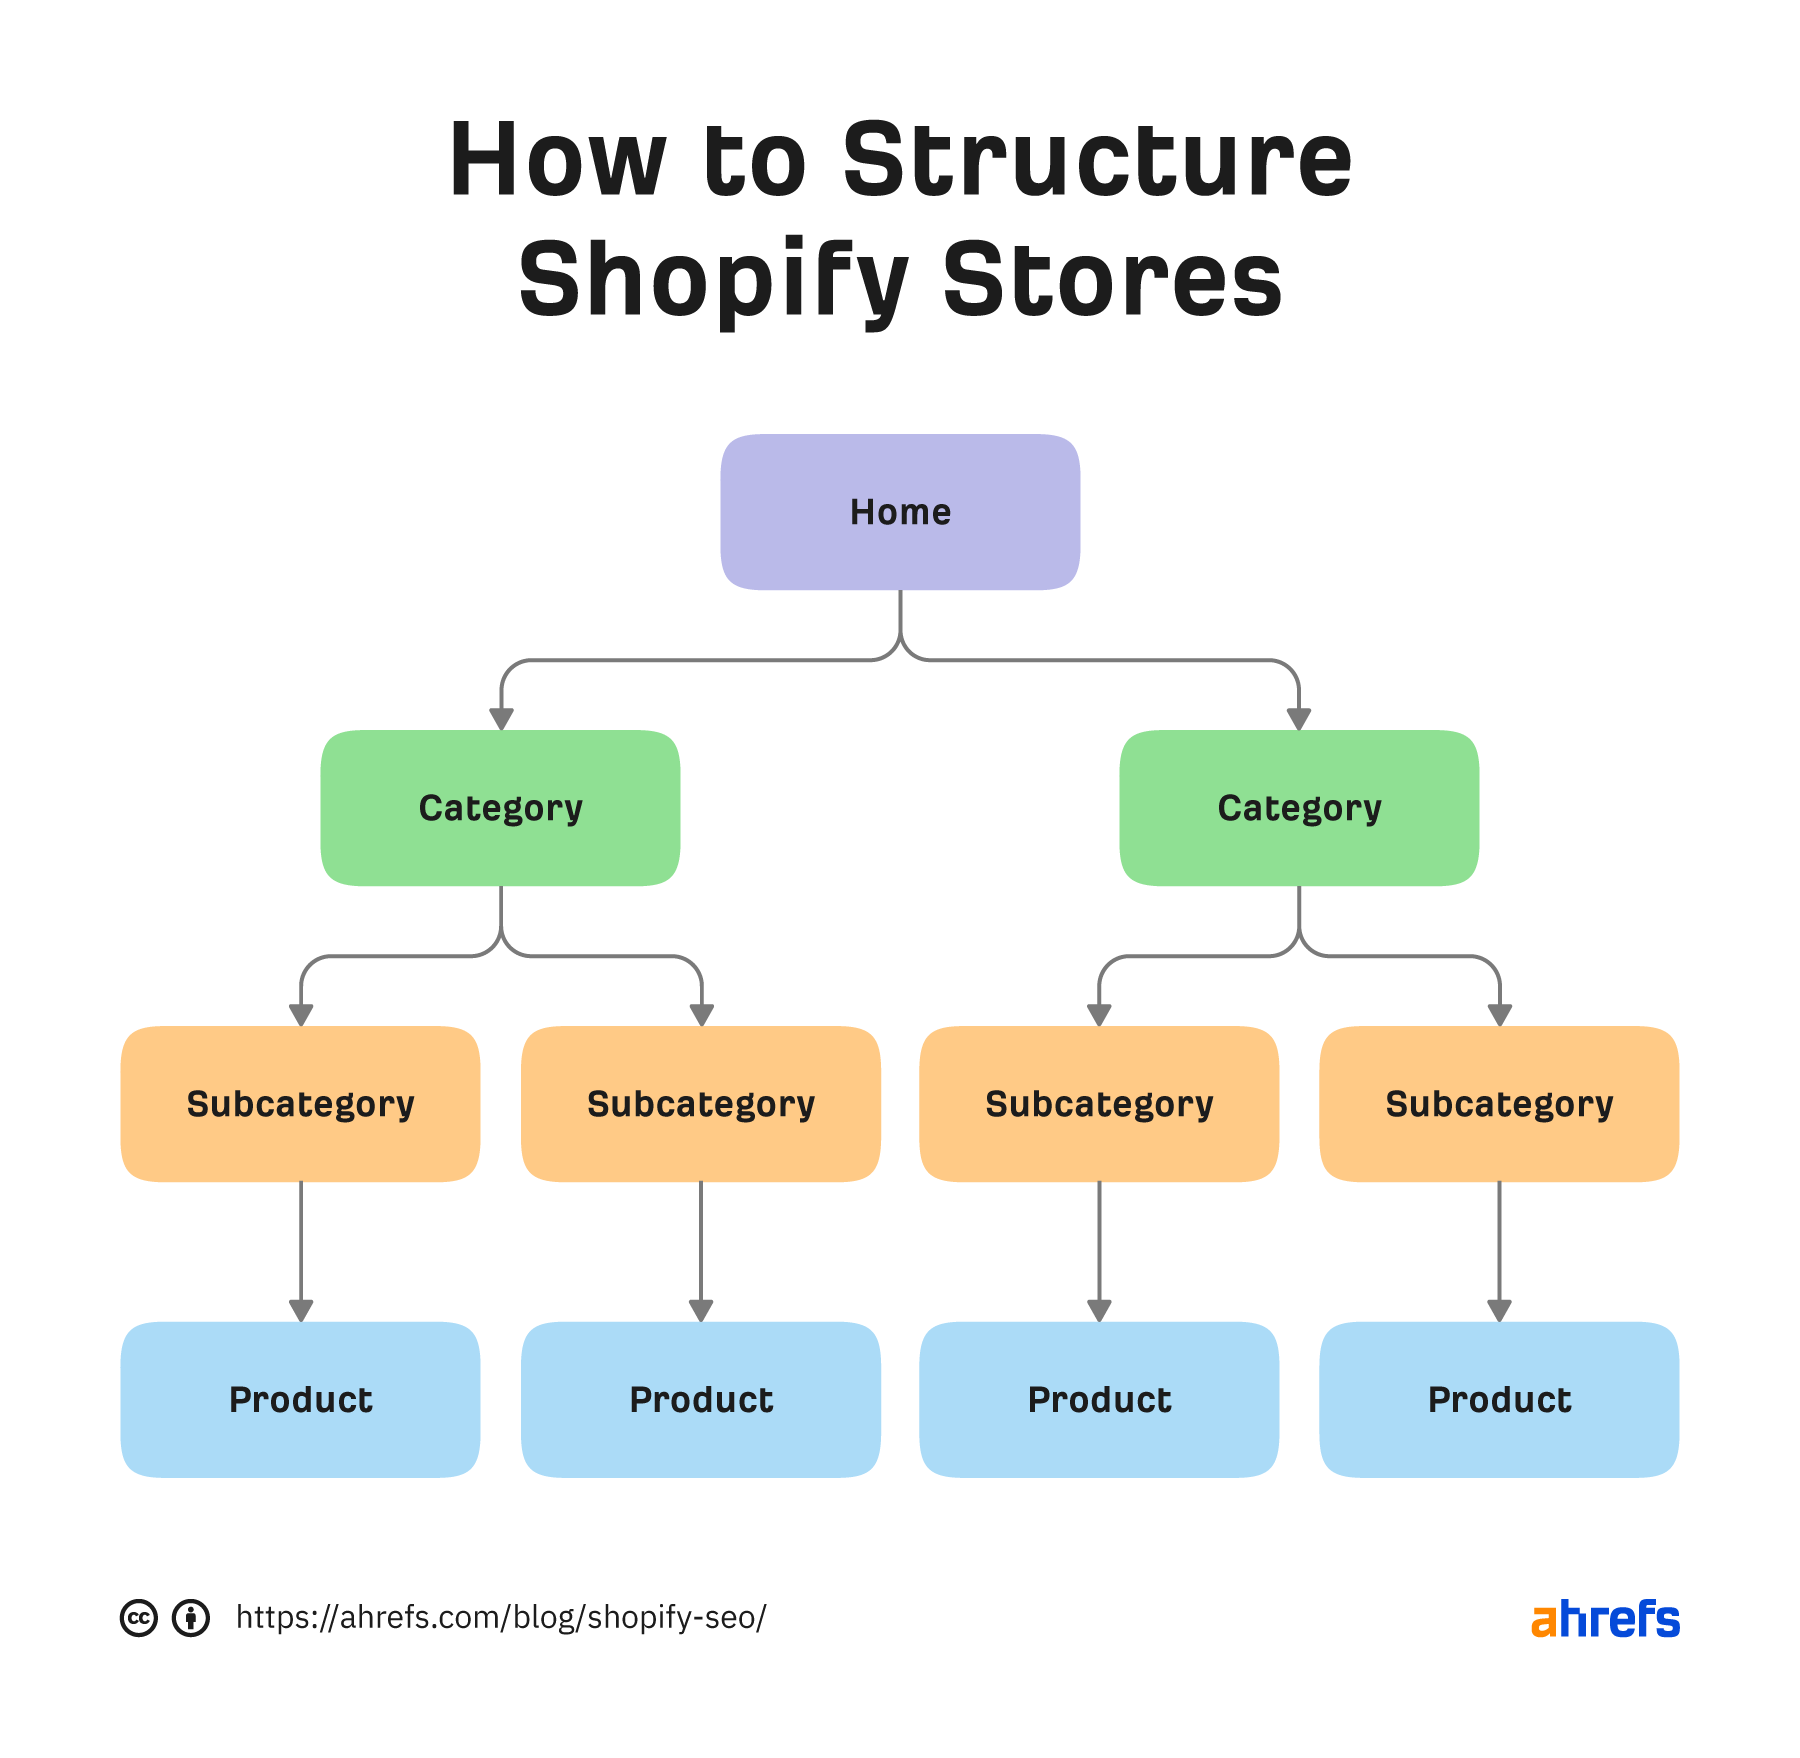 How to structure Shopify stores
